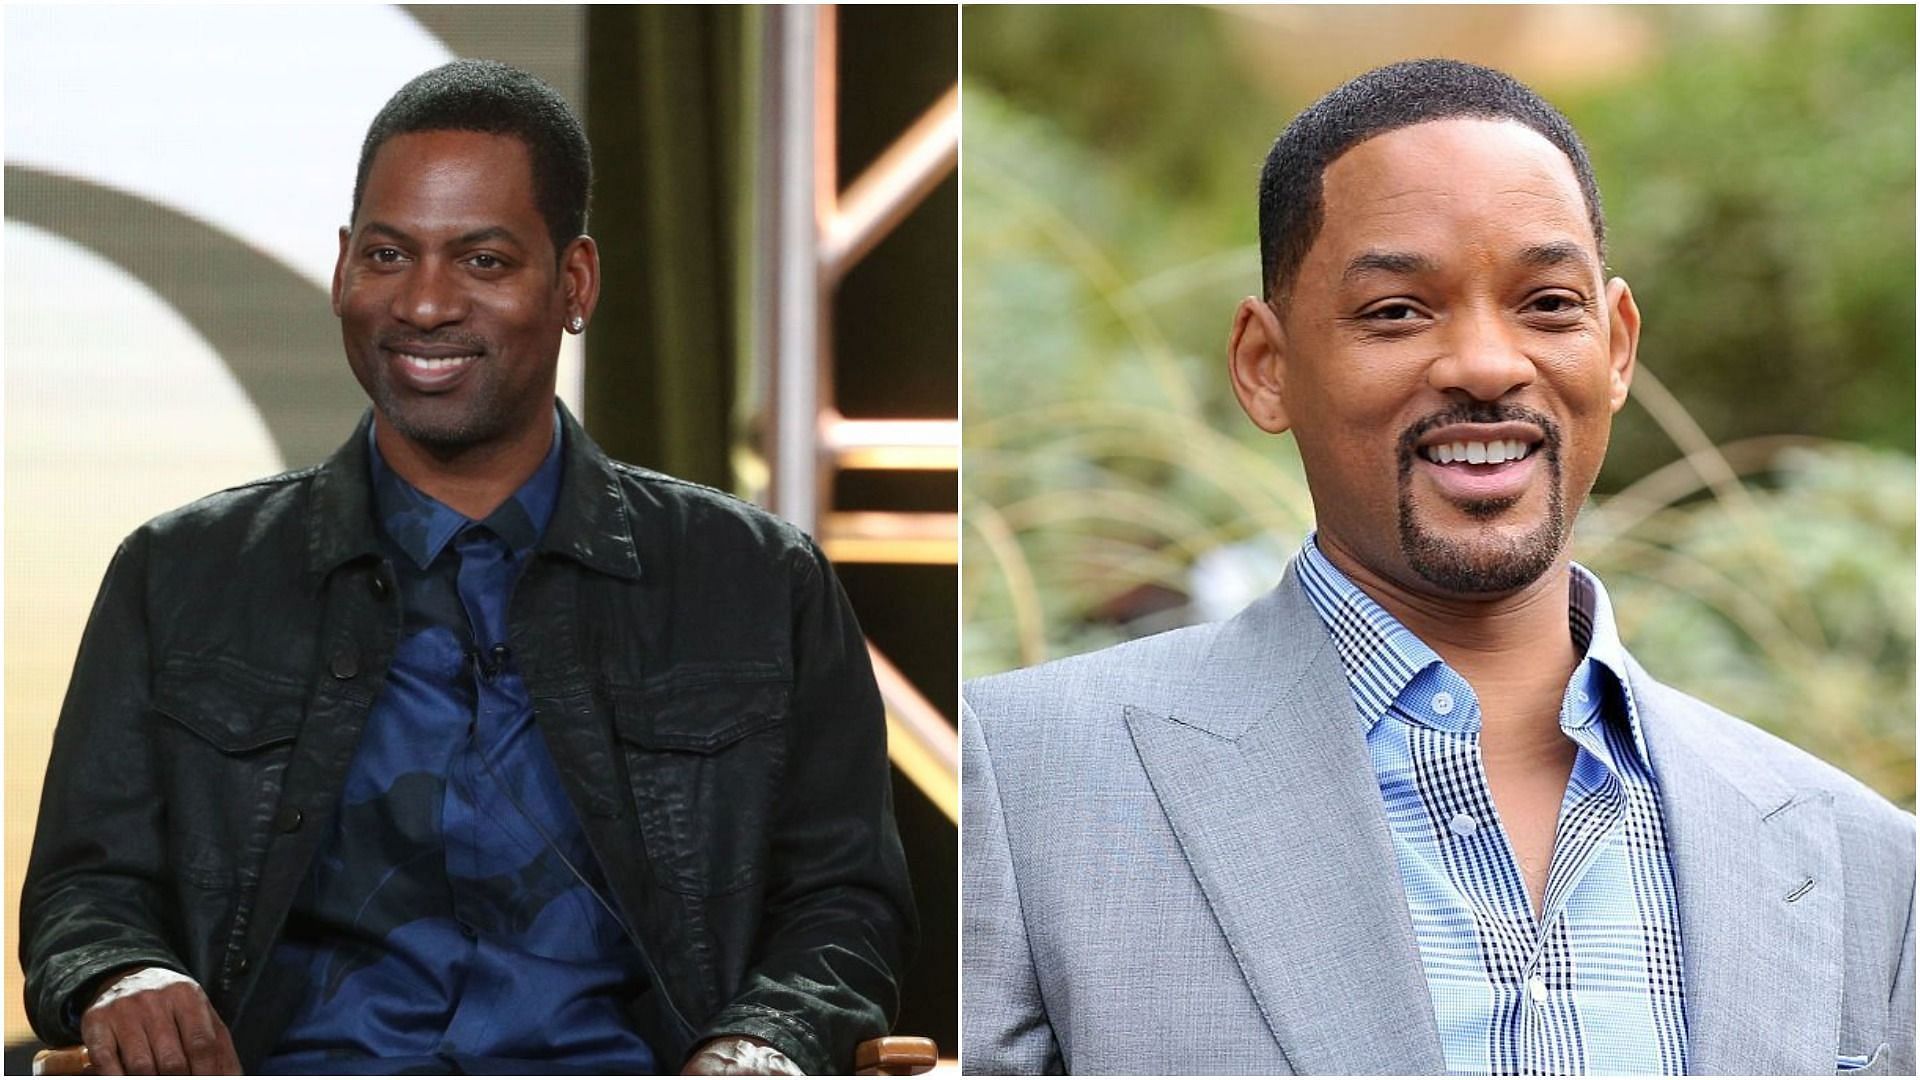 Tony Rock has refused to accept the apology of Will Smith (Images via Frederick M. Brown and Jerod Harris/Getty Images)